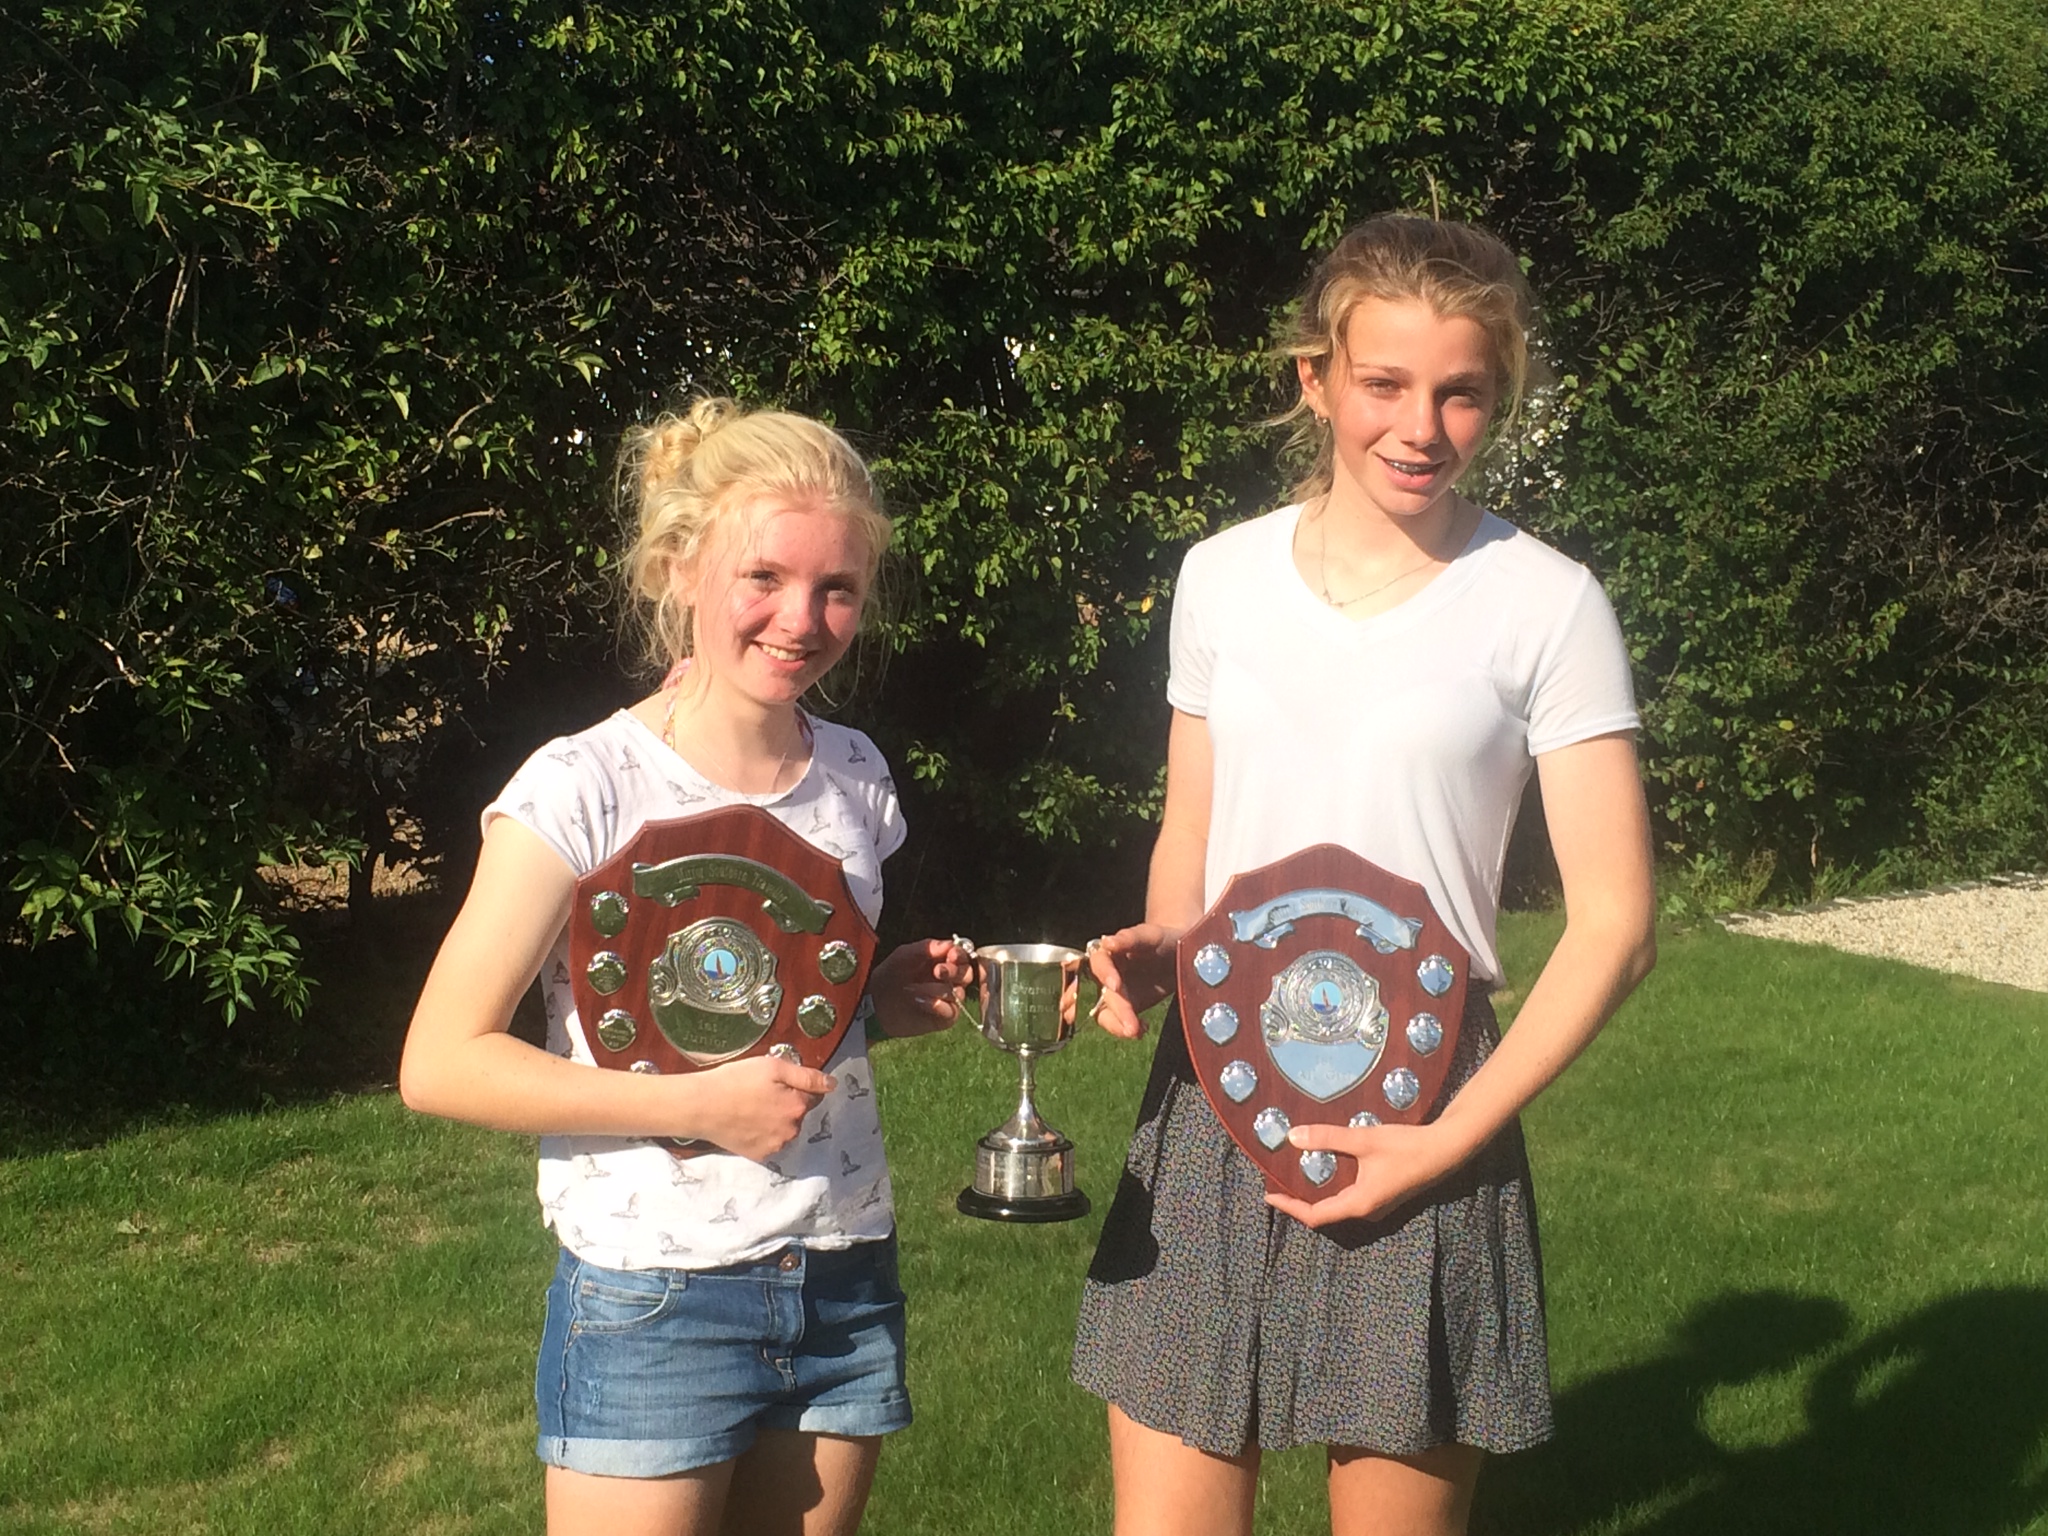 Two girls holding their trophies - a cup and two shields